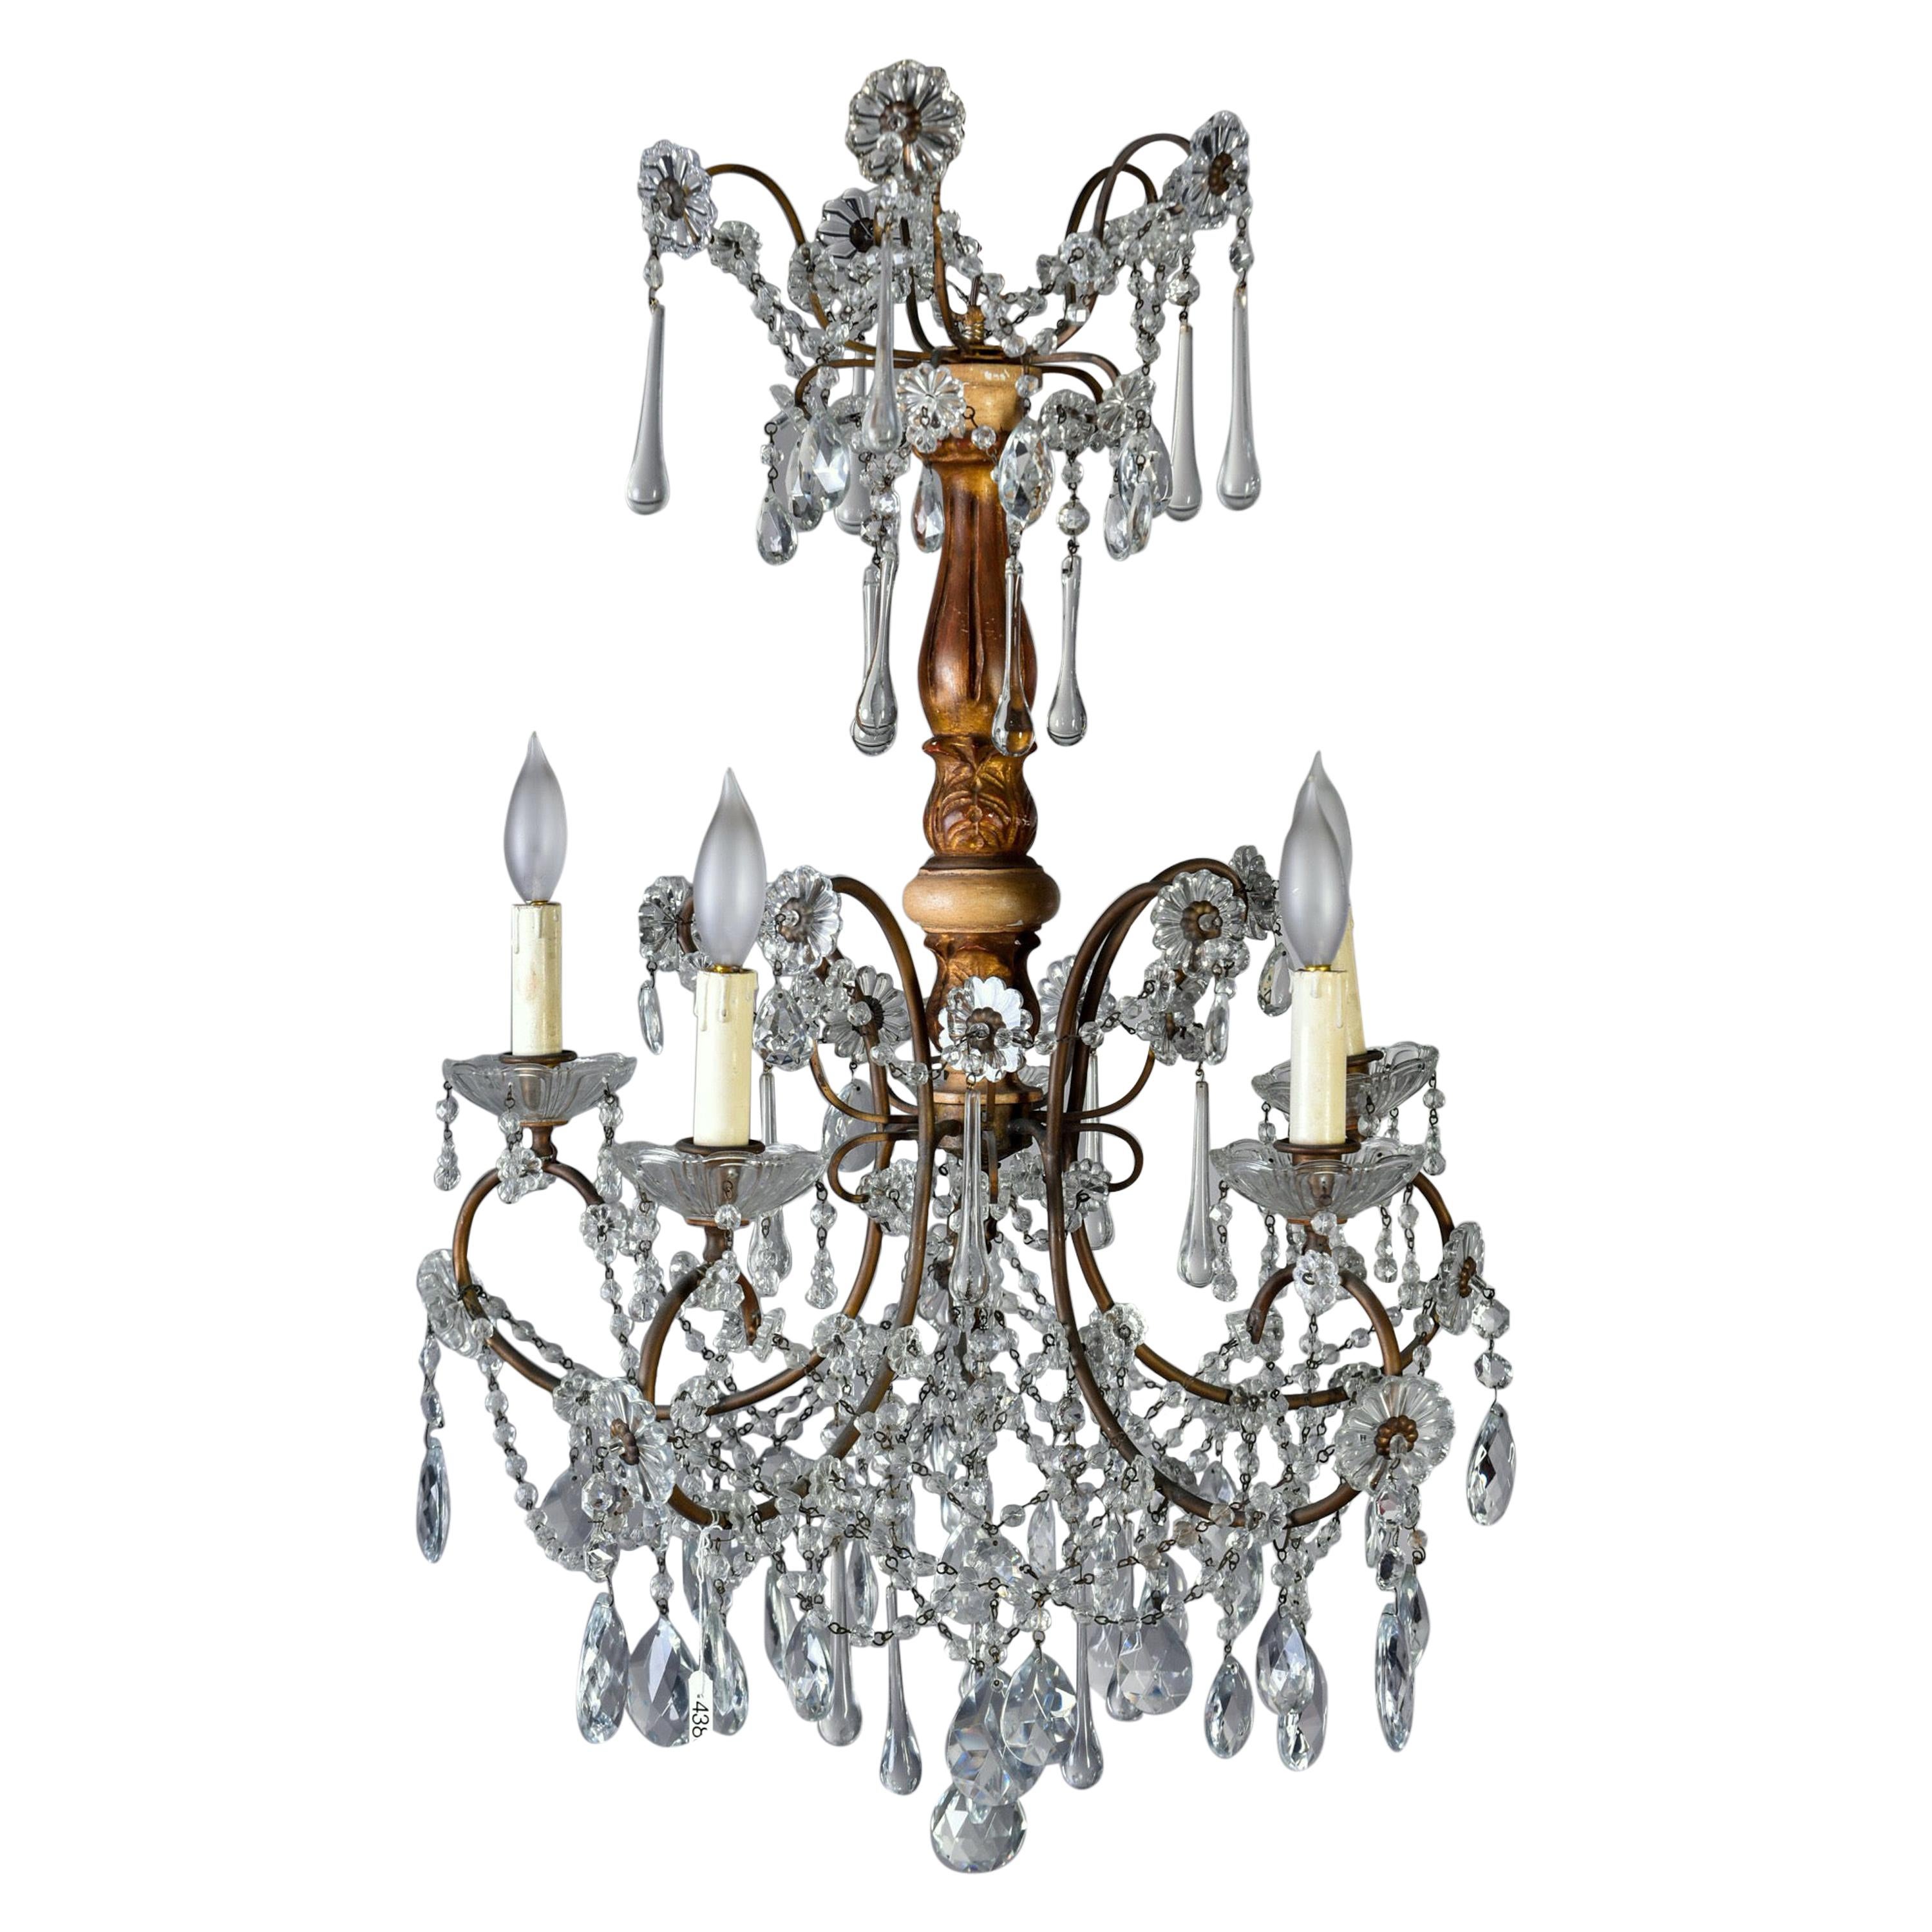 Early 20th Century Italian Five Light Crystal and Giltwood Chandelier